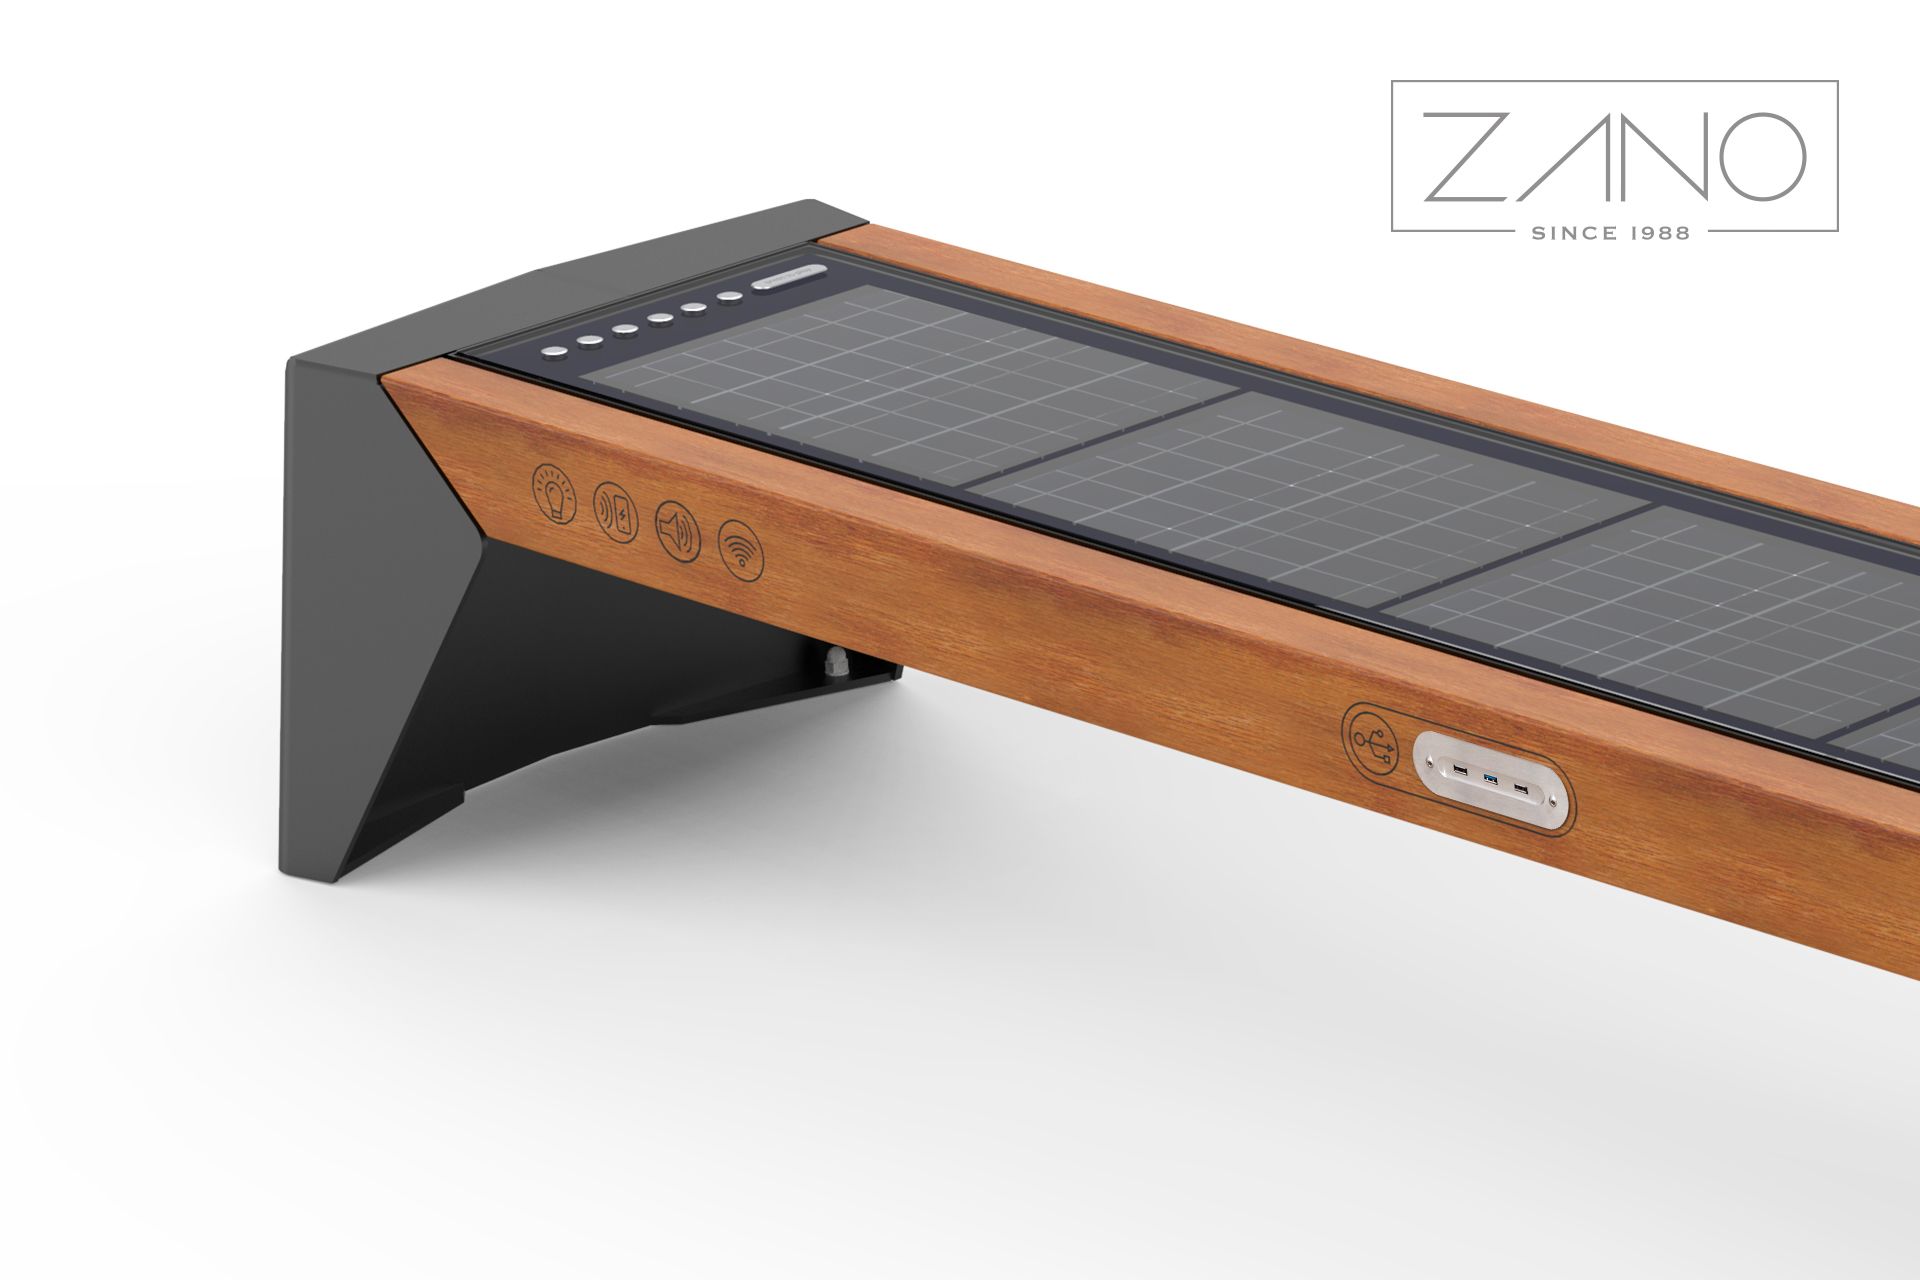 Solar-powered bench Photon as a device charger, Wi-Fi hotspot